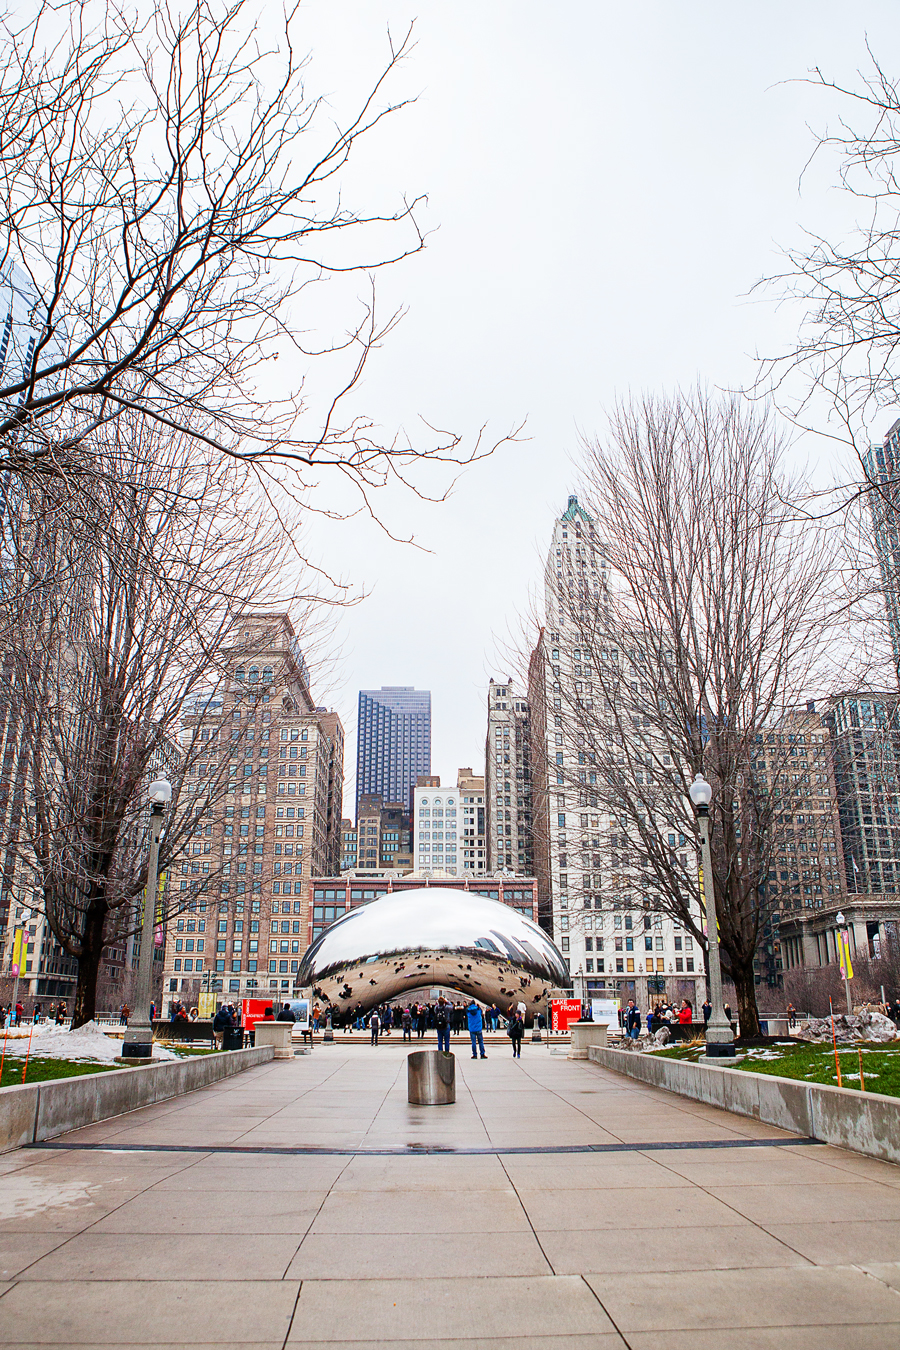 Chicago in 2 Days! What to do and tips to save money!